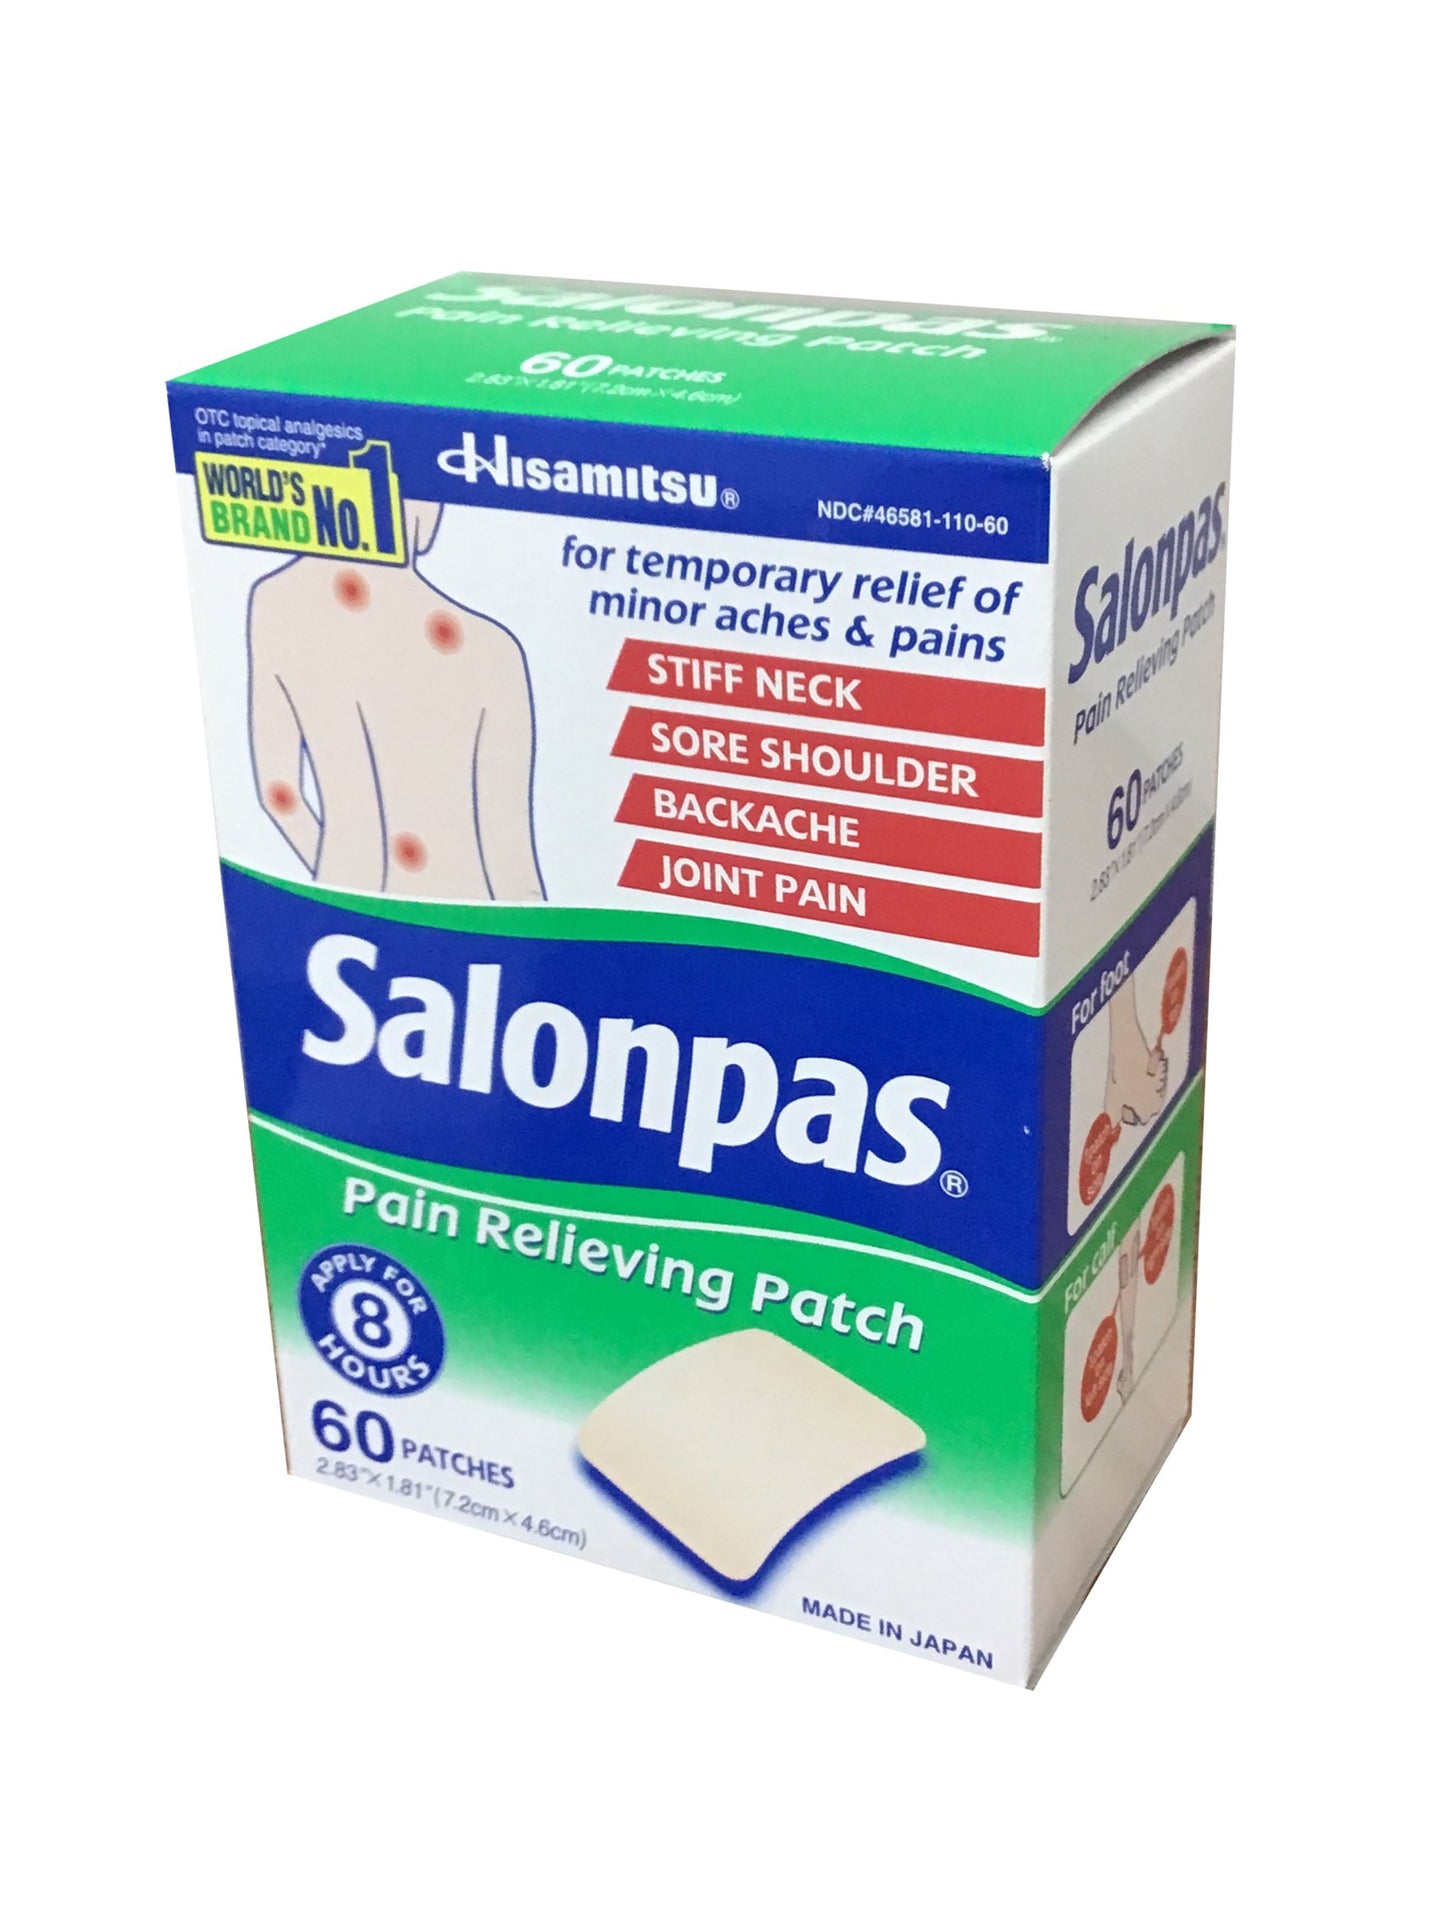 Salonpas Pain Relieving Patch (60 Patches) 止痛贴(60贴装)